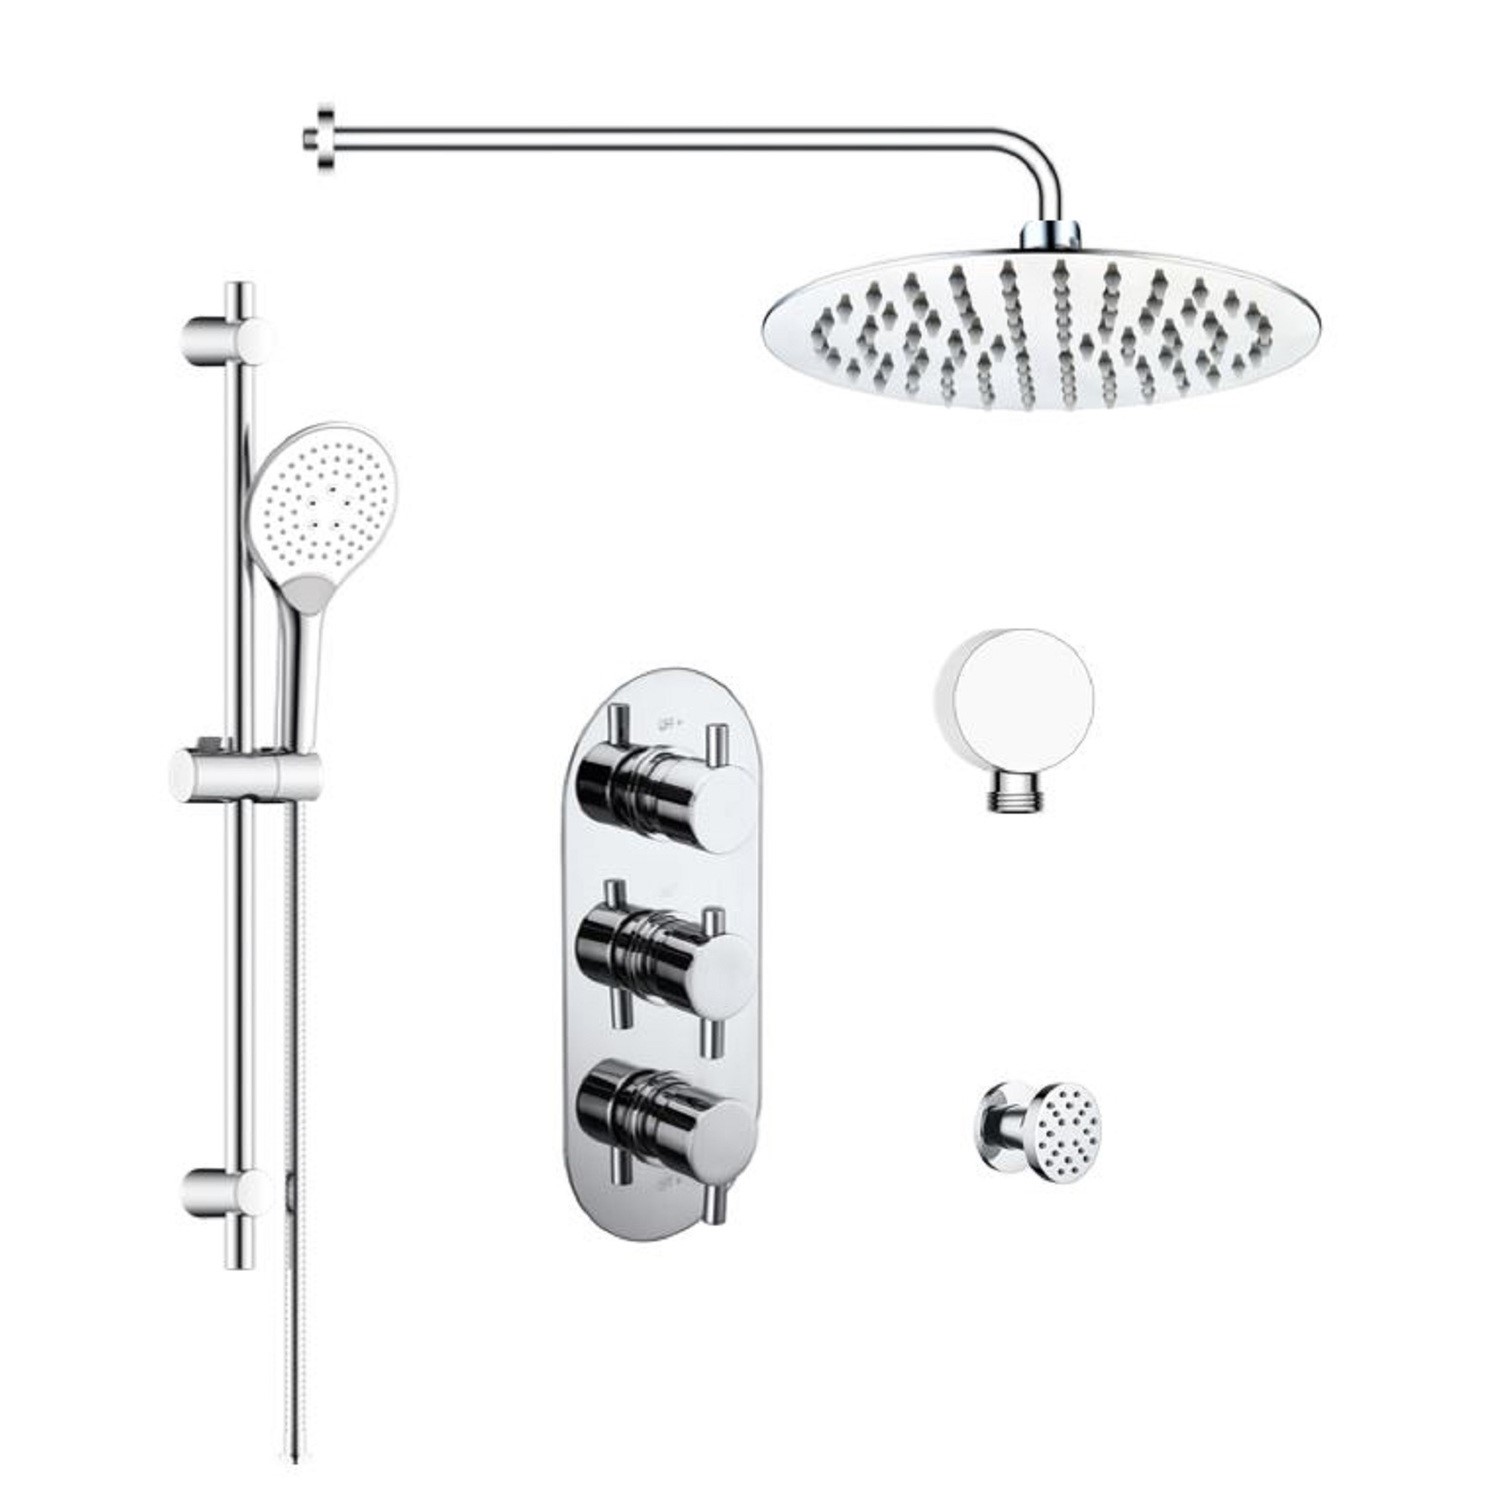 Concealed Thermostatic Mixer Shower with Slim Wall Mounted Shower Head Handset & Body Jets - Flow